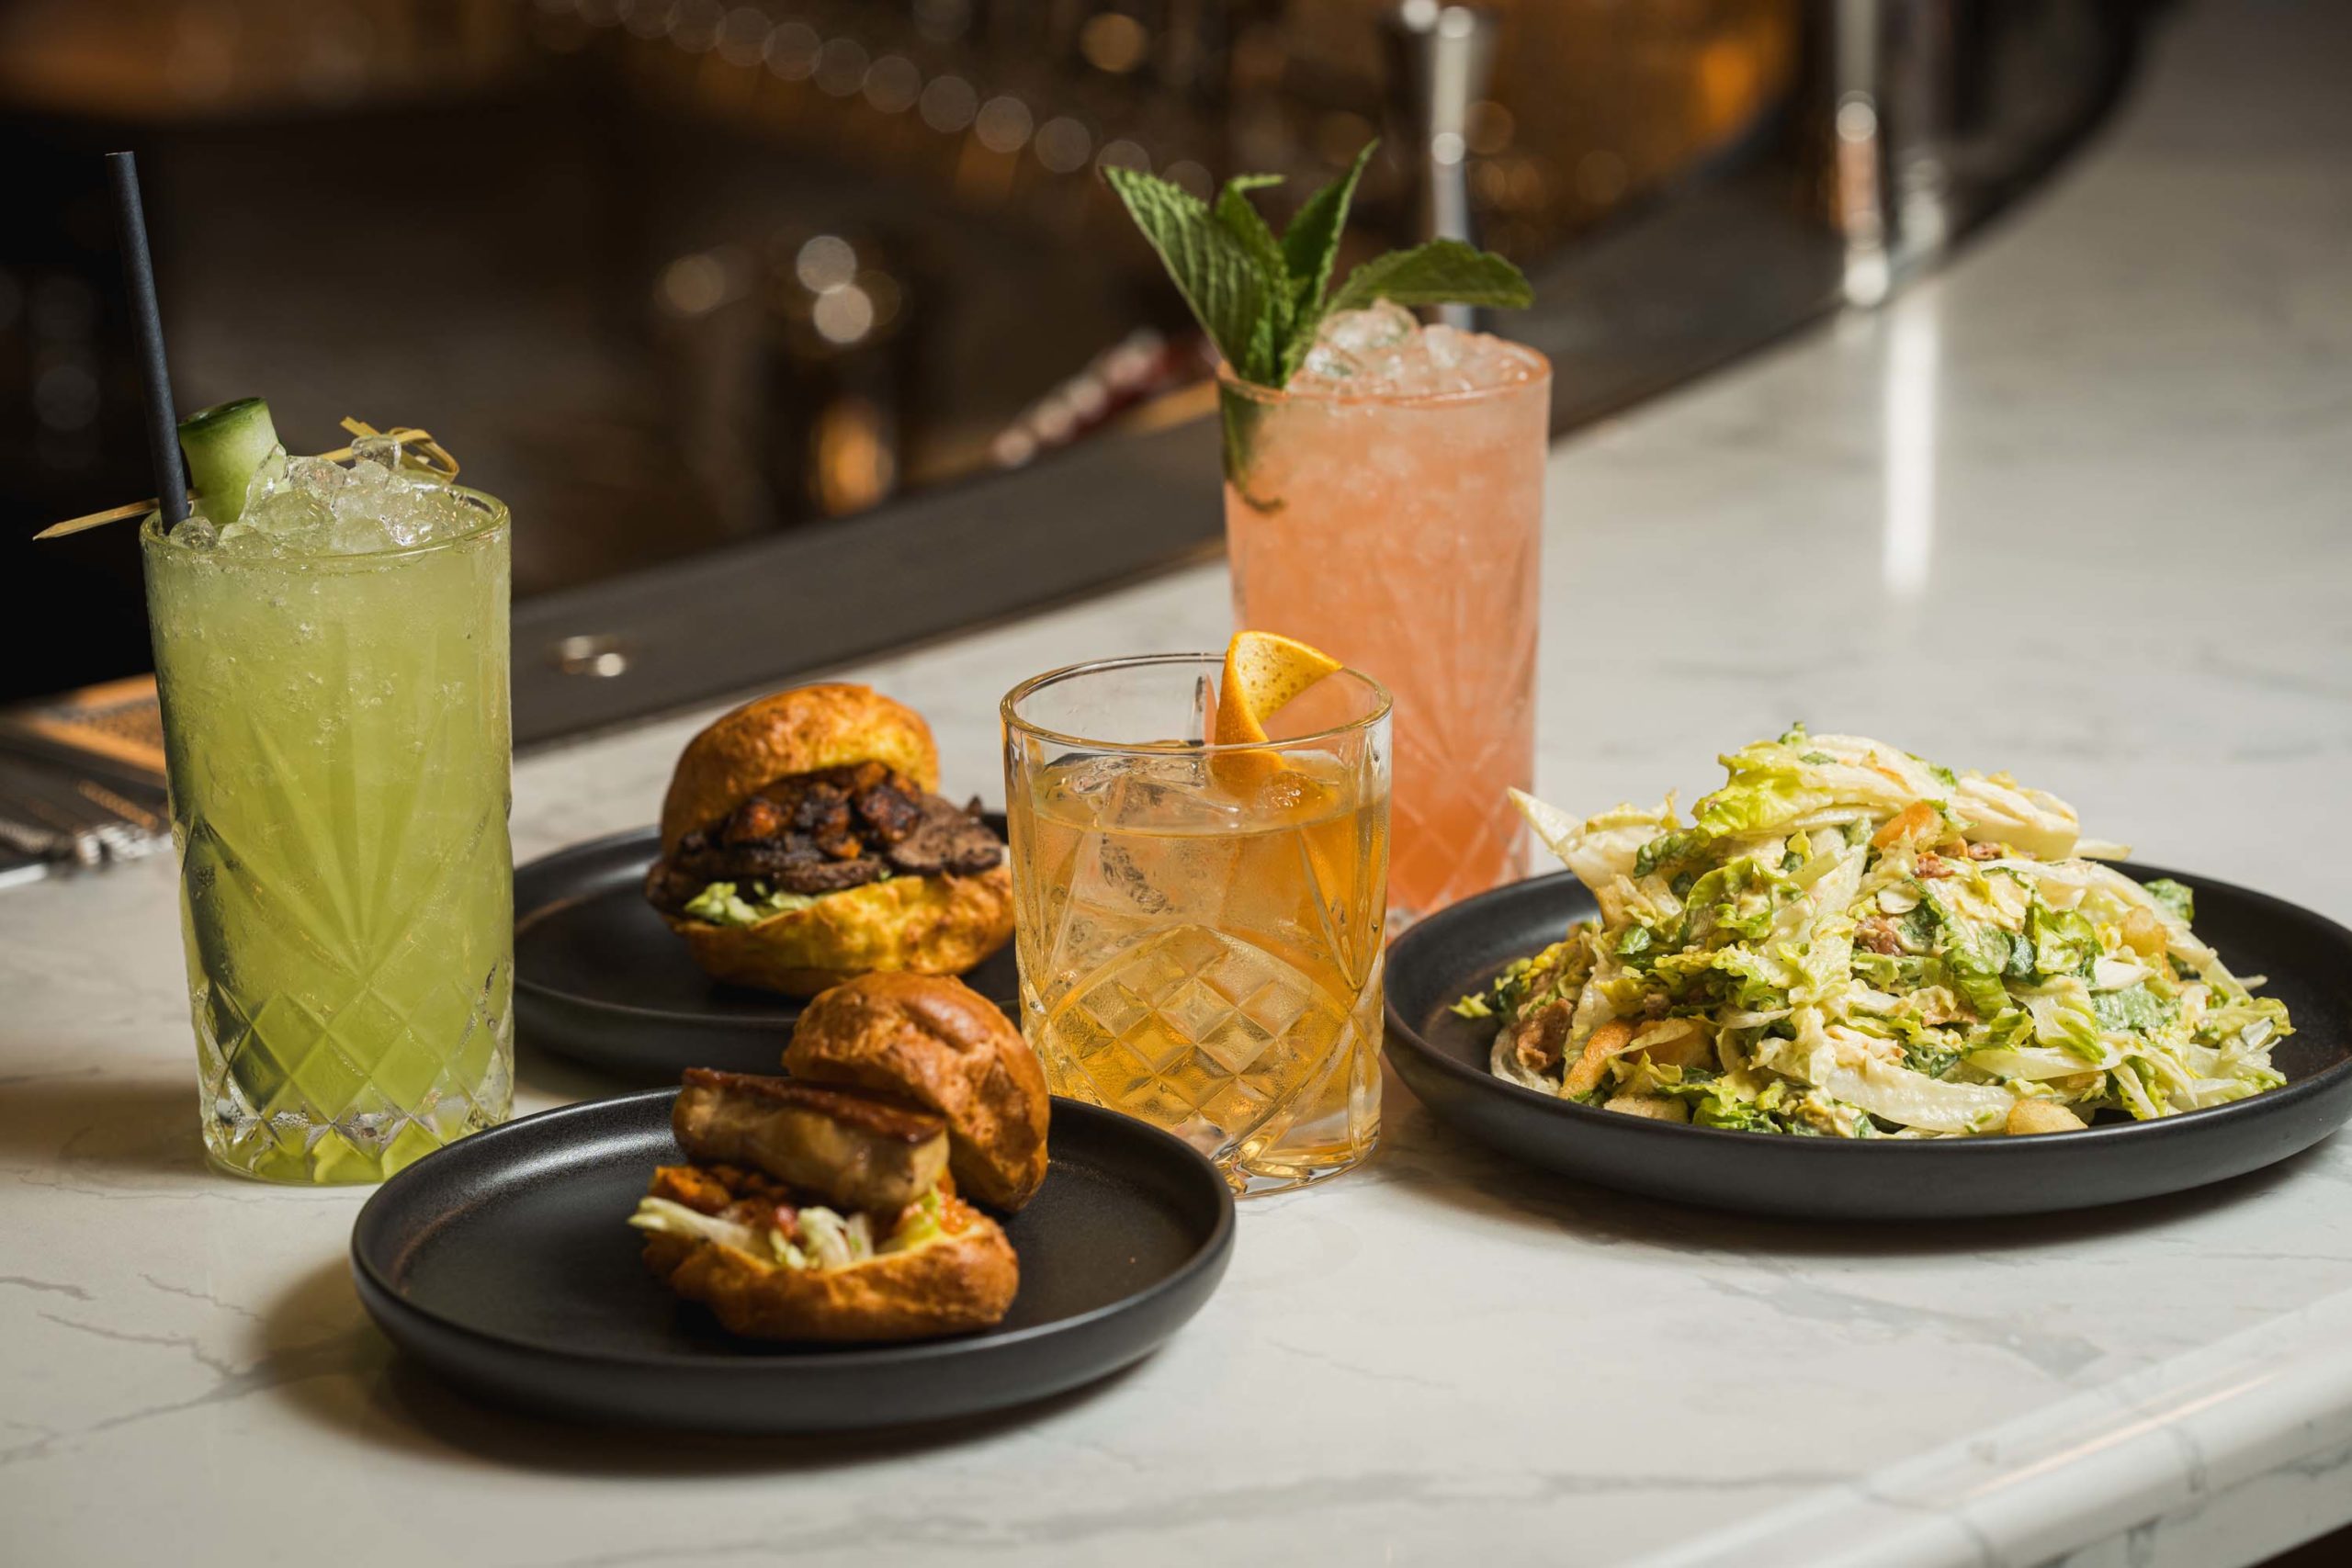 A selection of sandwiches, salads and drinks from In Good Spirits, a bar inside CIBC Square's new food hall